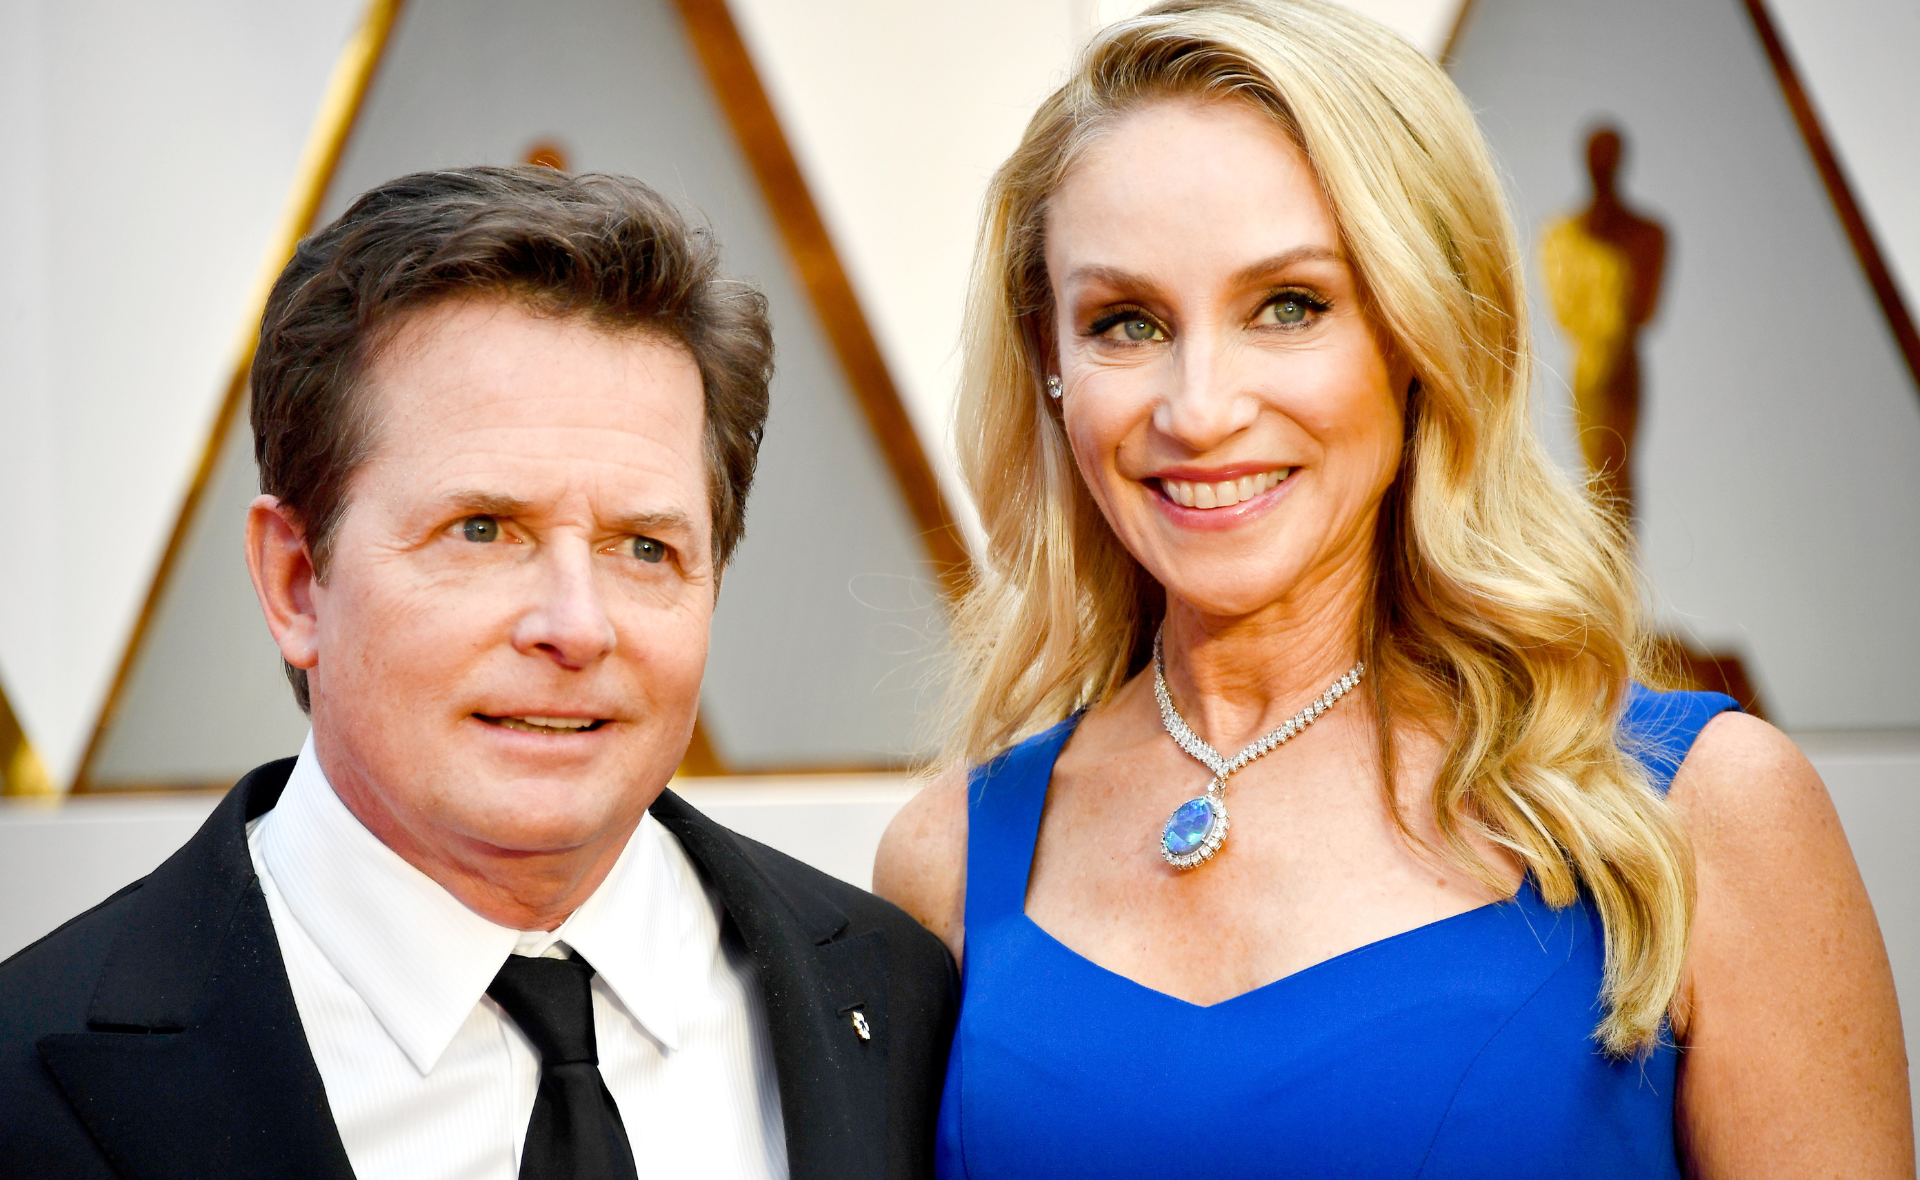 Michael J Fox and wife Tracy Pollan share heartwarming tributes to mark their 35th anniversary